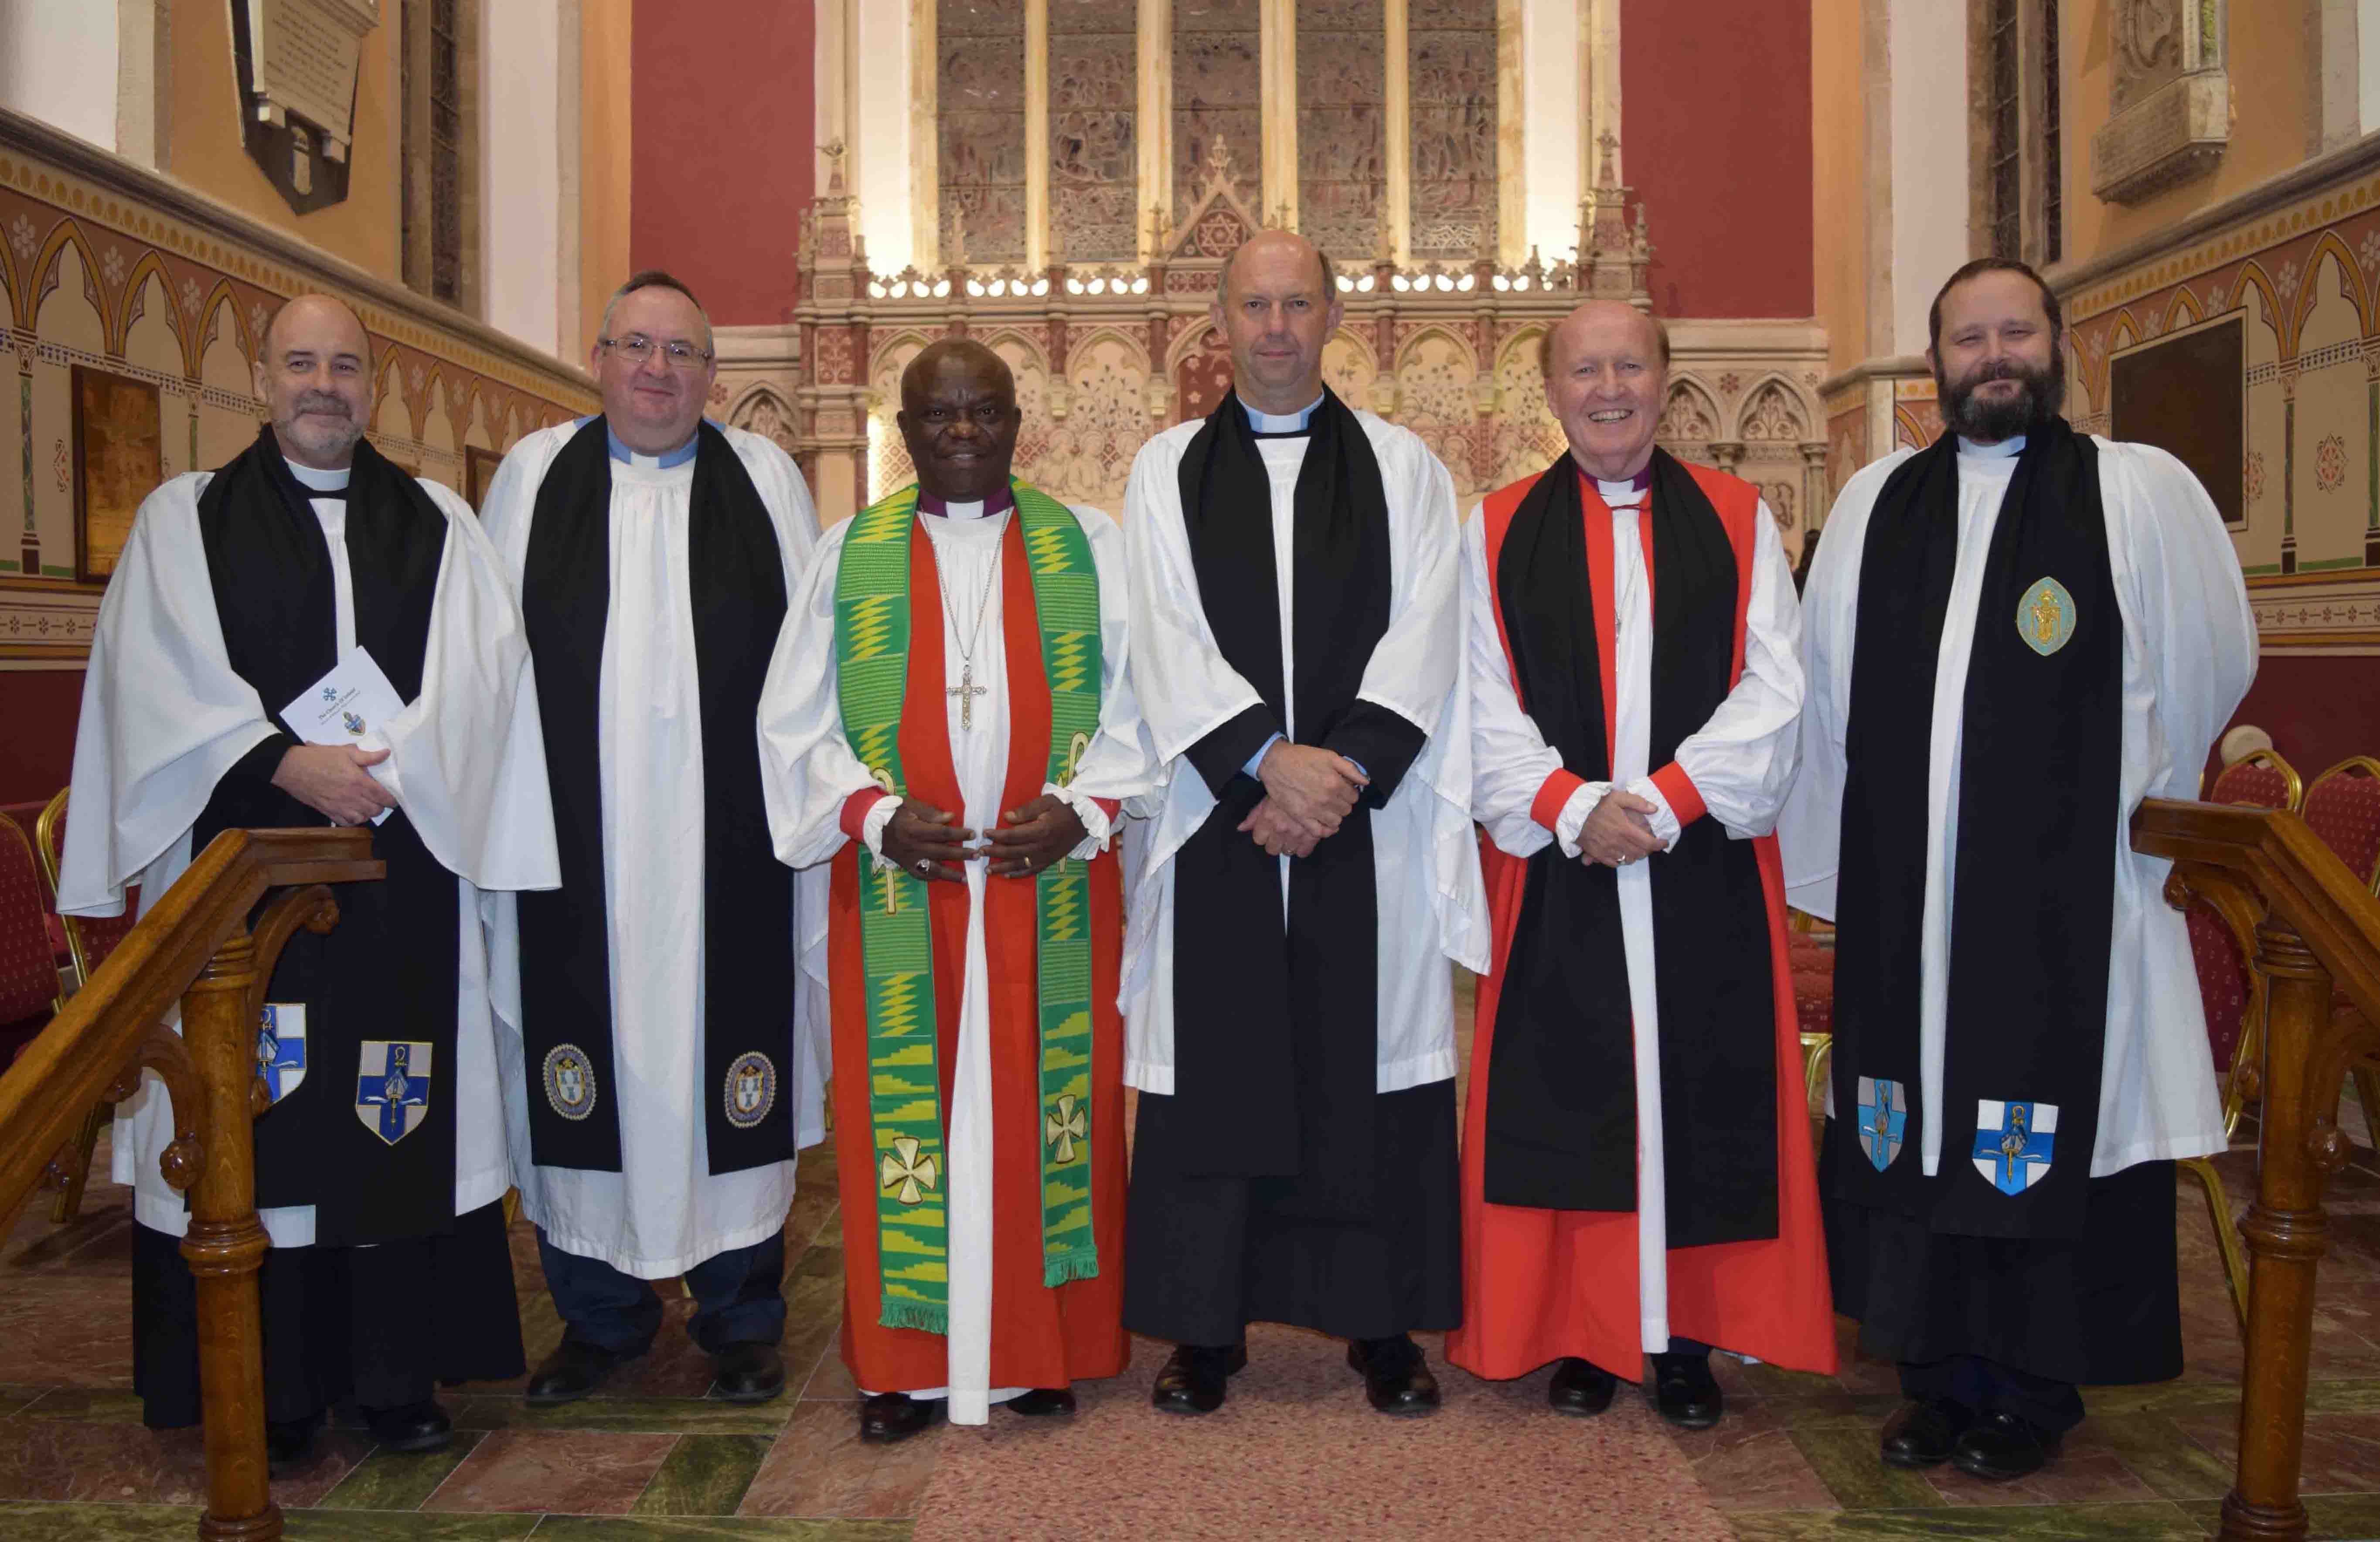 The Revd David Moses pictured with clergy at his ordination.